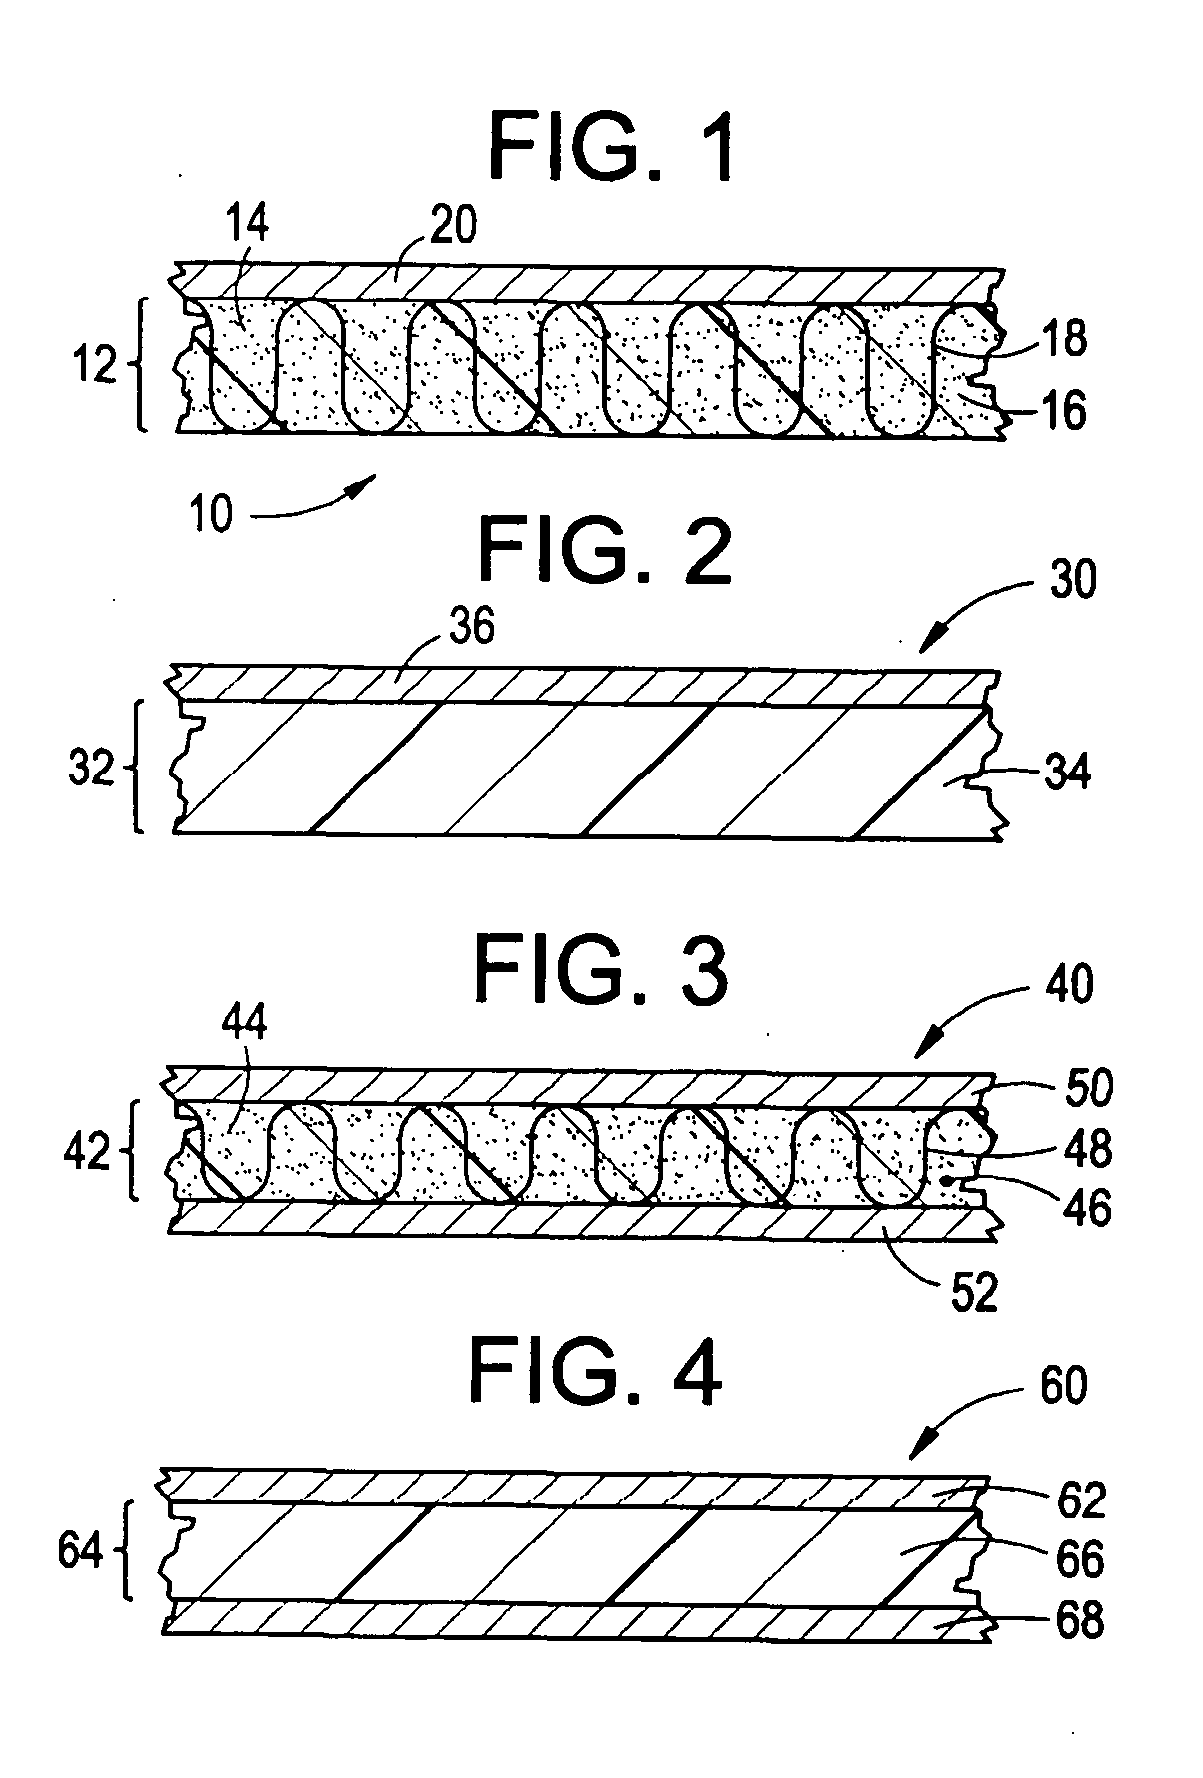 Circuit materials, circuits, multi-layer circuits, and methods of manufacture thereof